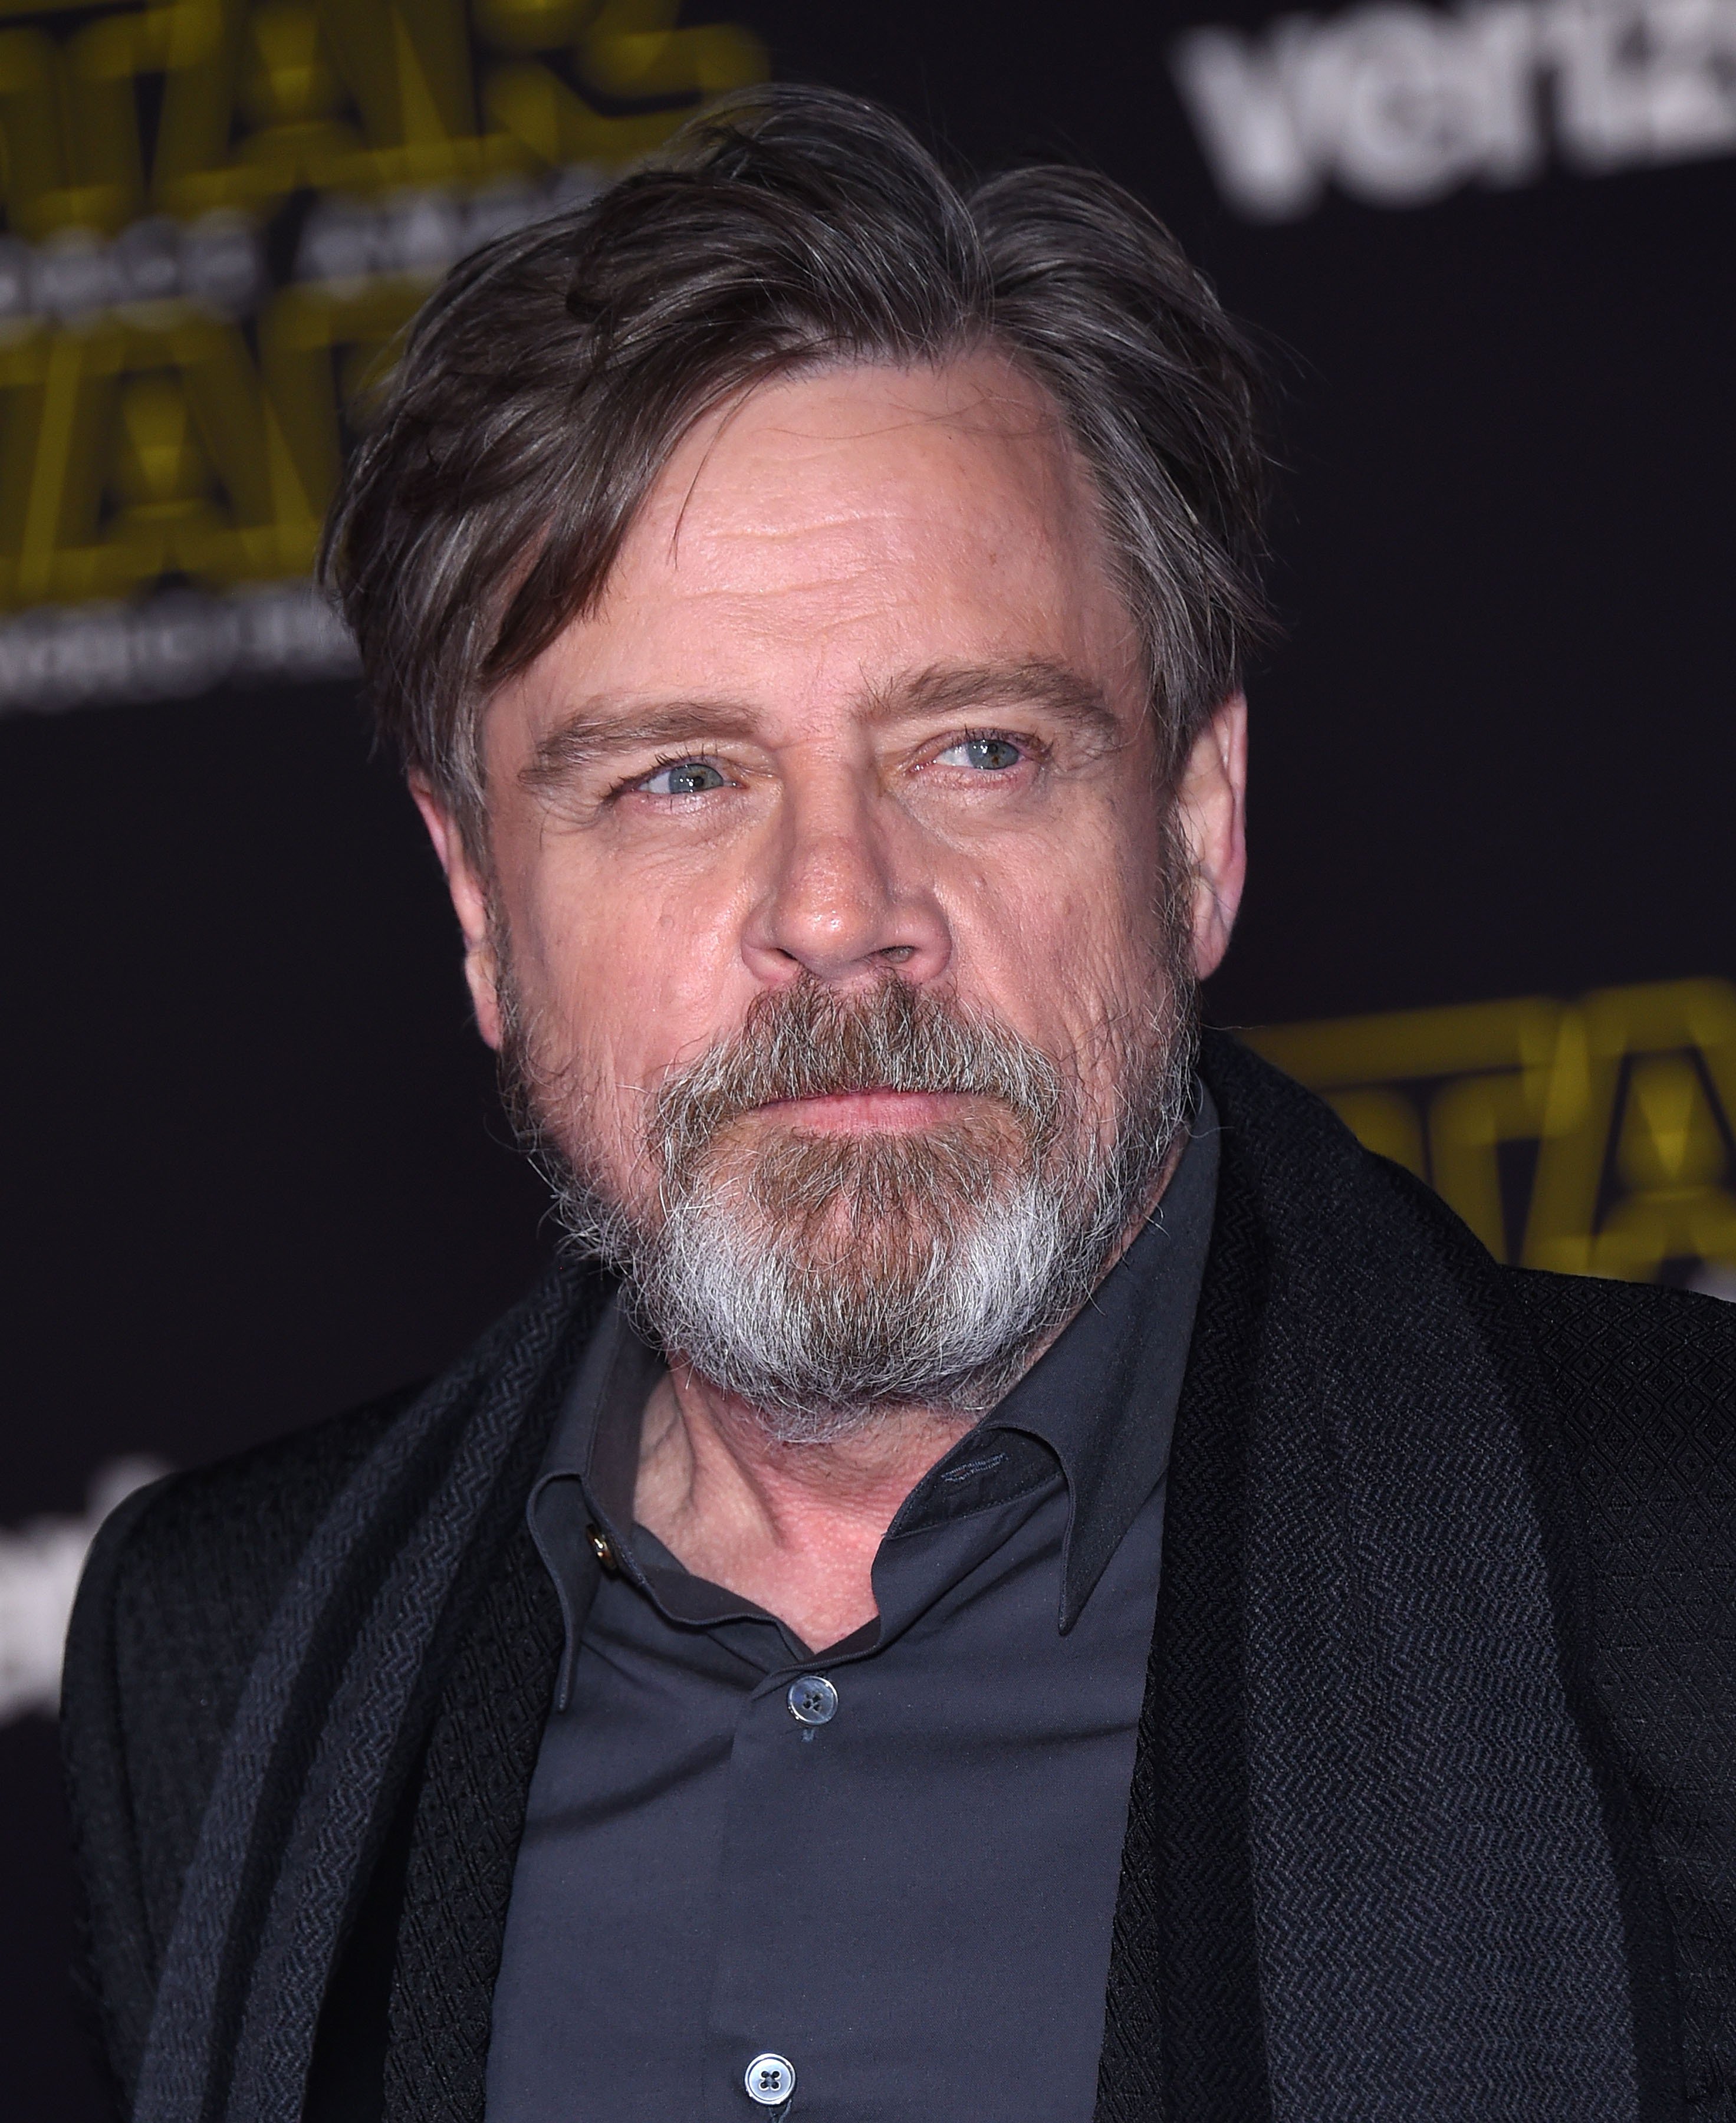 Mark Hamill arrives at the "Star Wars: The Force Awakens" World Premiere on December 14, 2015, in Hollywood, California. | Shutterstock